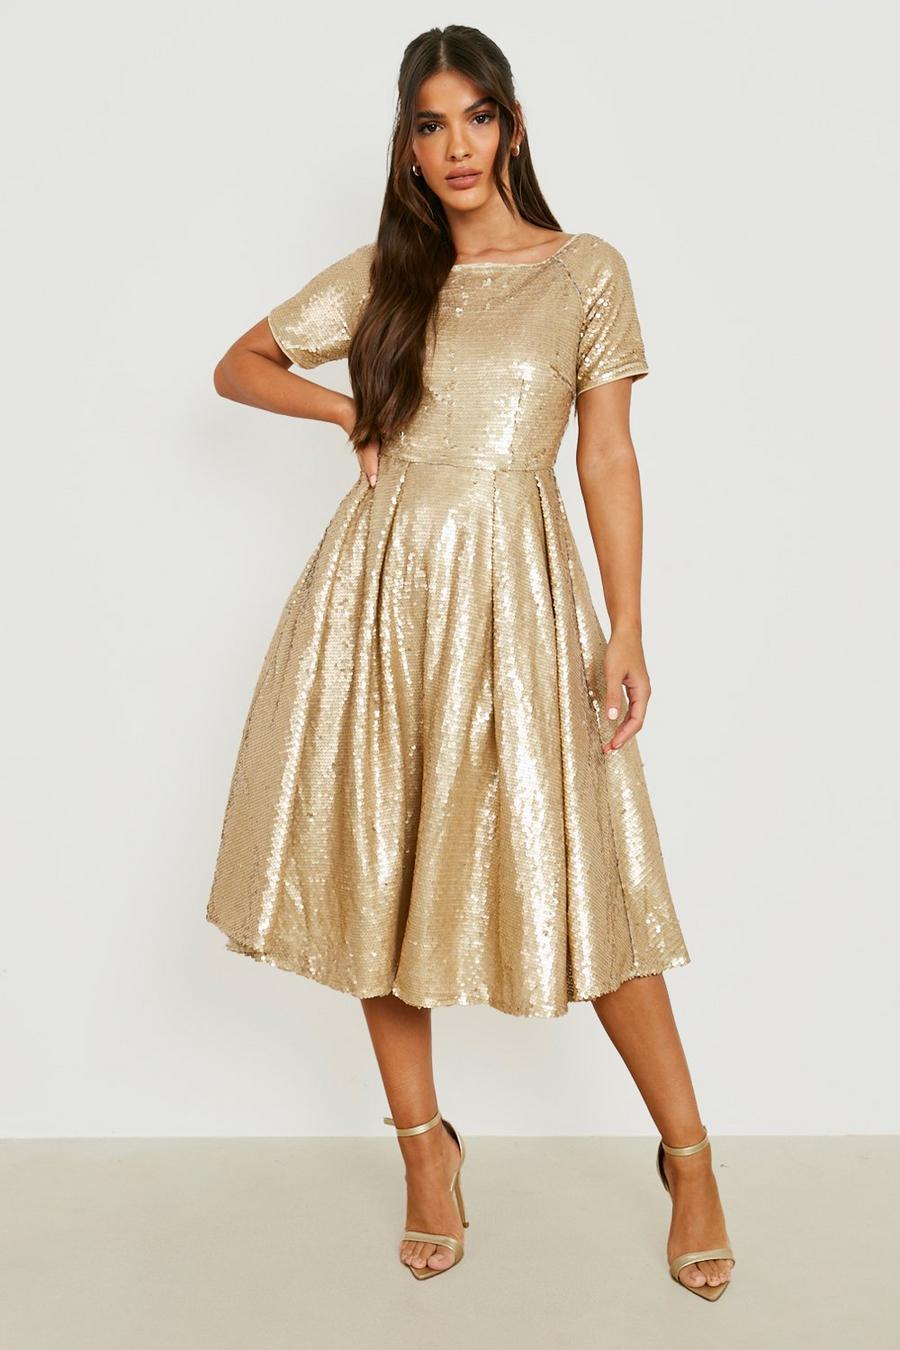 Taylor Swift Sequin Dress  Get the Look – Forever Dolled Up